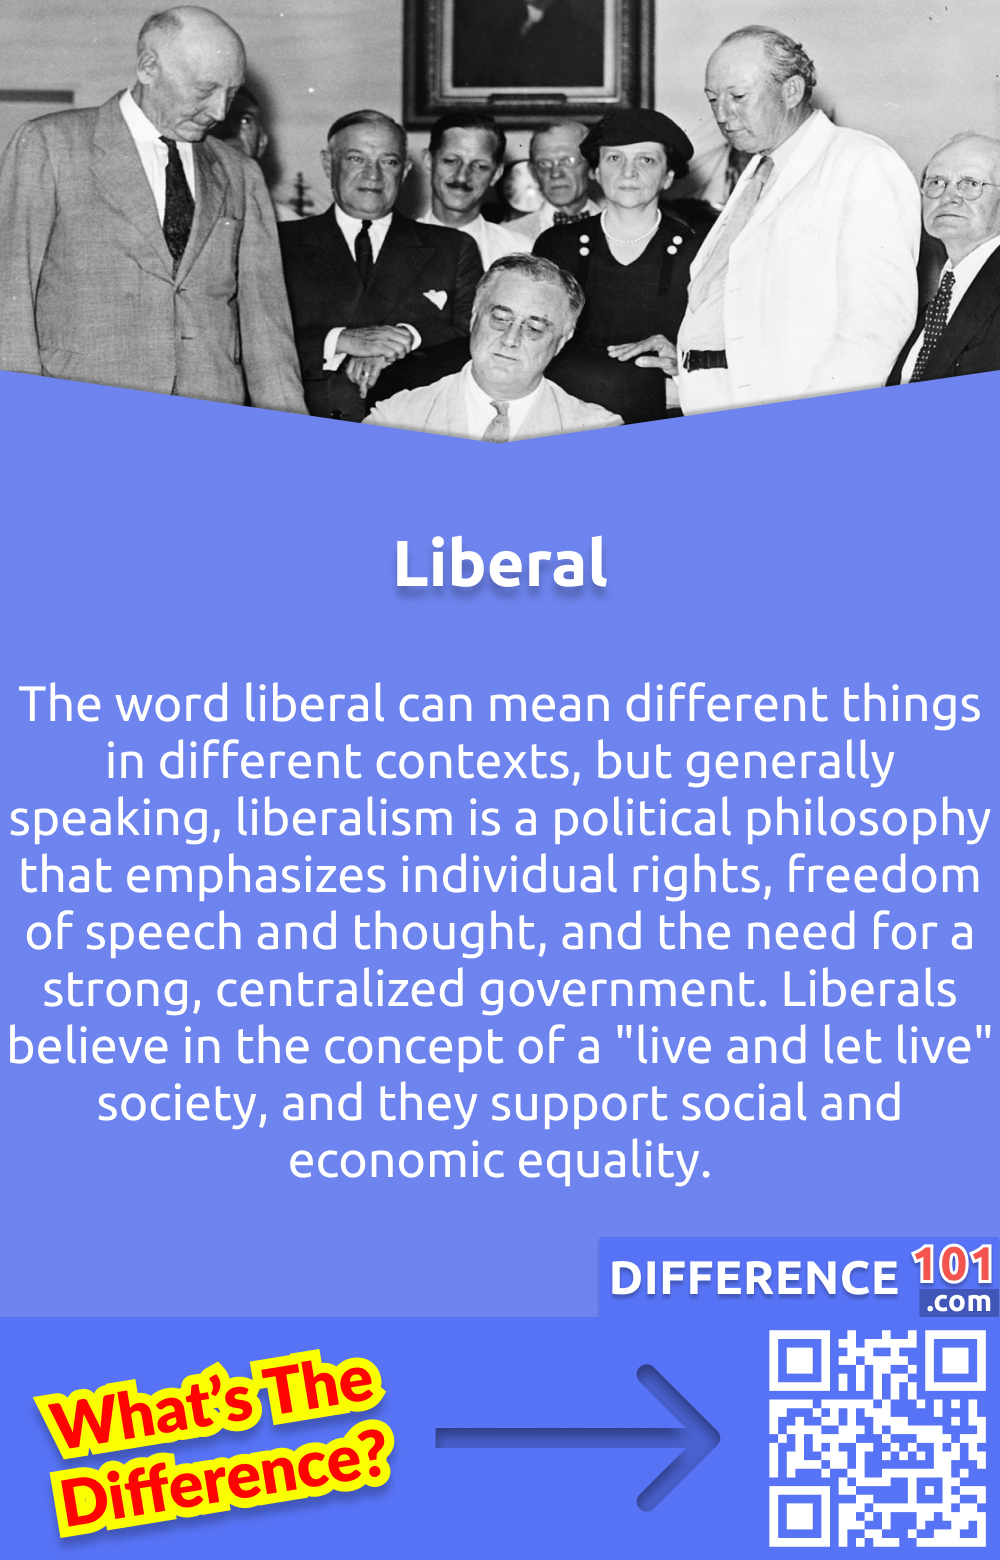 What Is Liberal? The word liberal can mean different things in different contexts, but generally speaking, liberalism is a political philosophy that emphasizes individual rights, freedom of speech and thought, and the need for a strong, centralized government. Liberals believe in the concept of a "live and let live" society, and they support social and economic equality.
